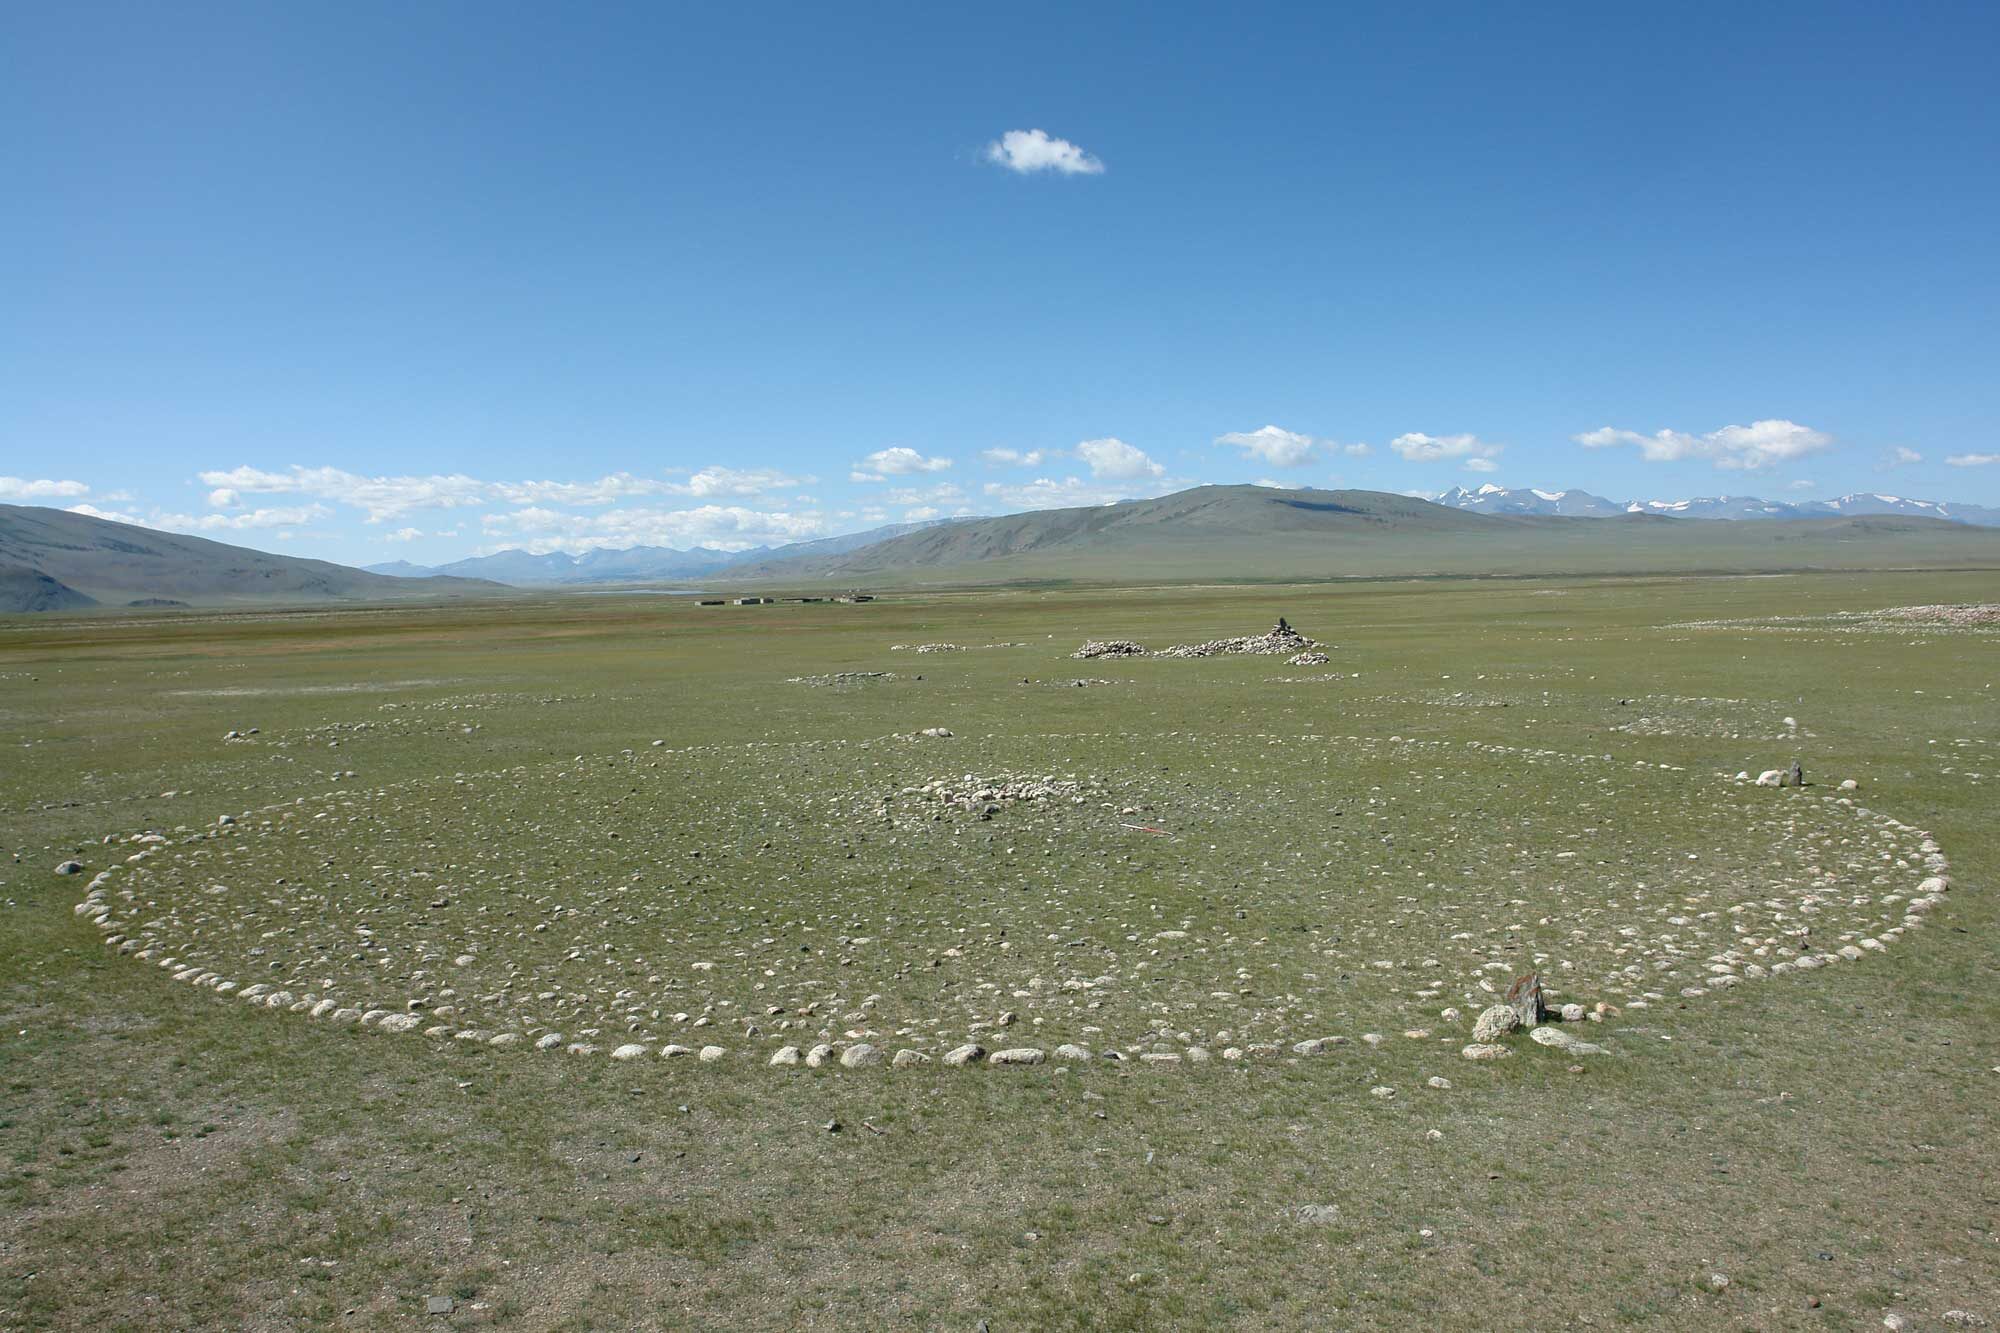 Livestock and dairying led to dramatic social changes in ancient Mongolia, U-M study shows